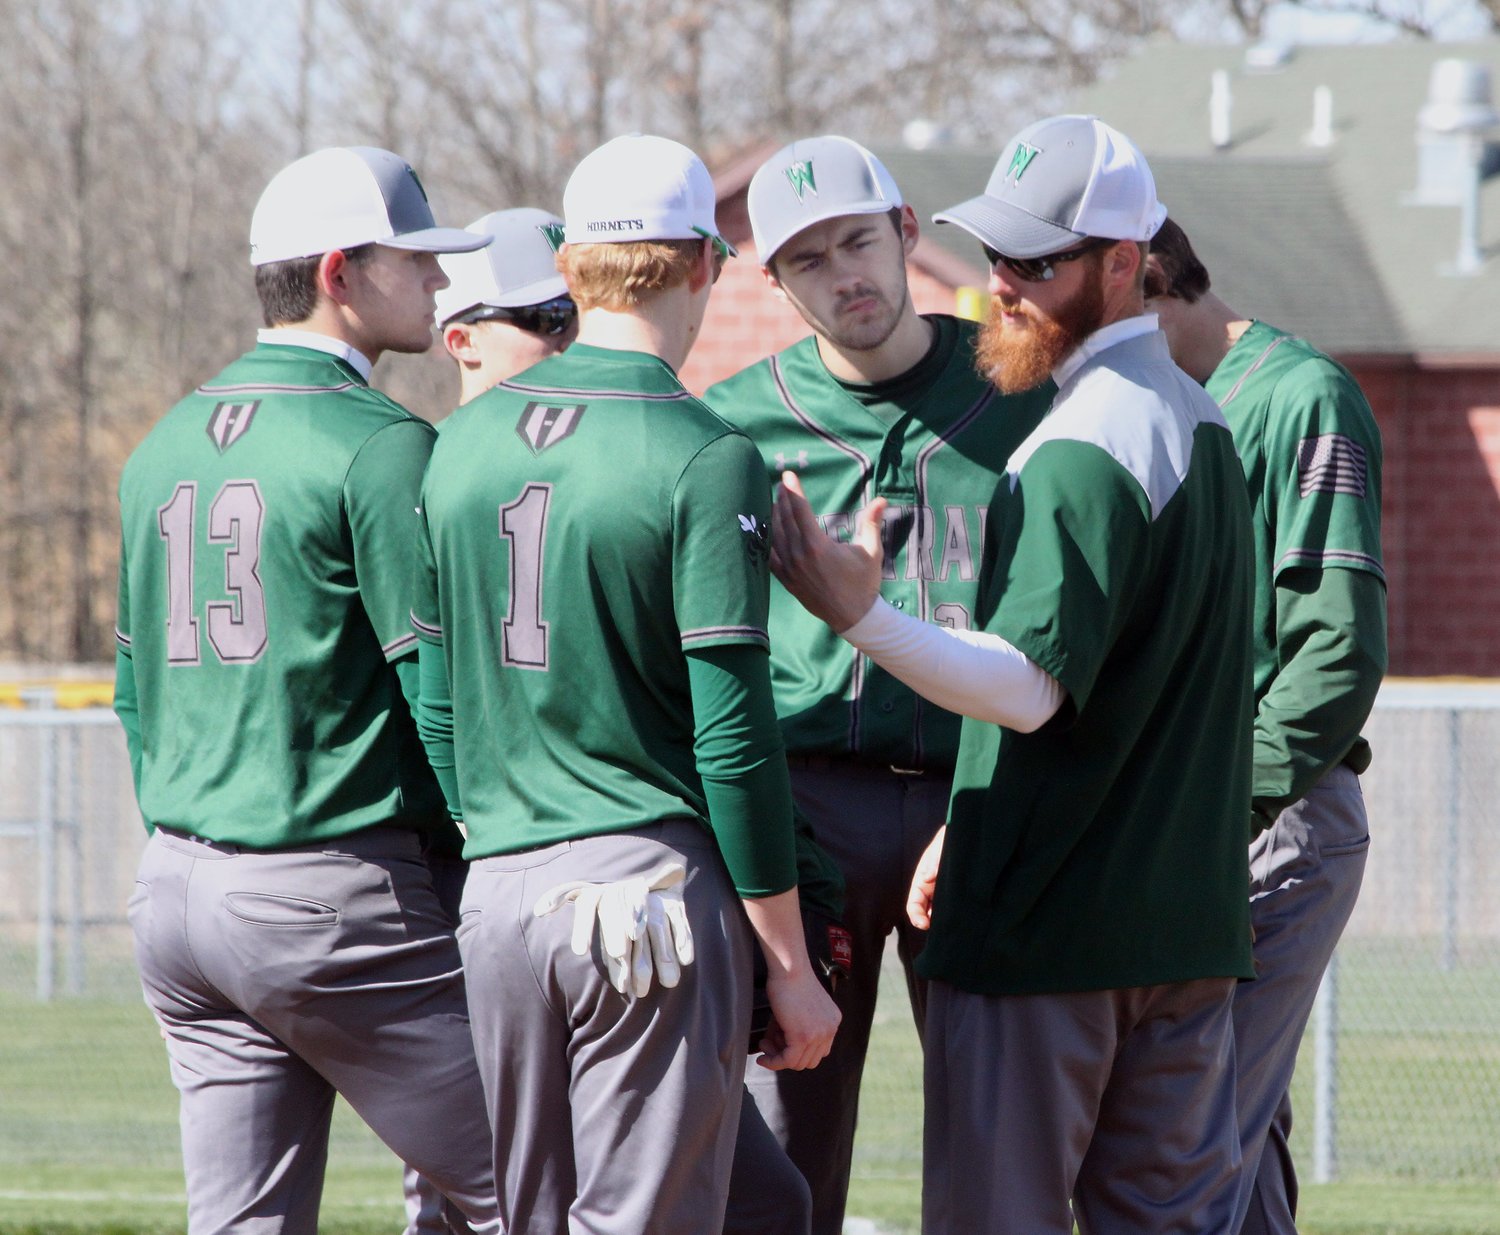 Westran High School baseball coach Tyler Tanner gestures with his hand as he is shown visiting with infielders of the Hornets 2019 spring team during a home game played that season. Tanner will be head coach at Westran for his first time this 2021 season.